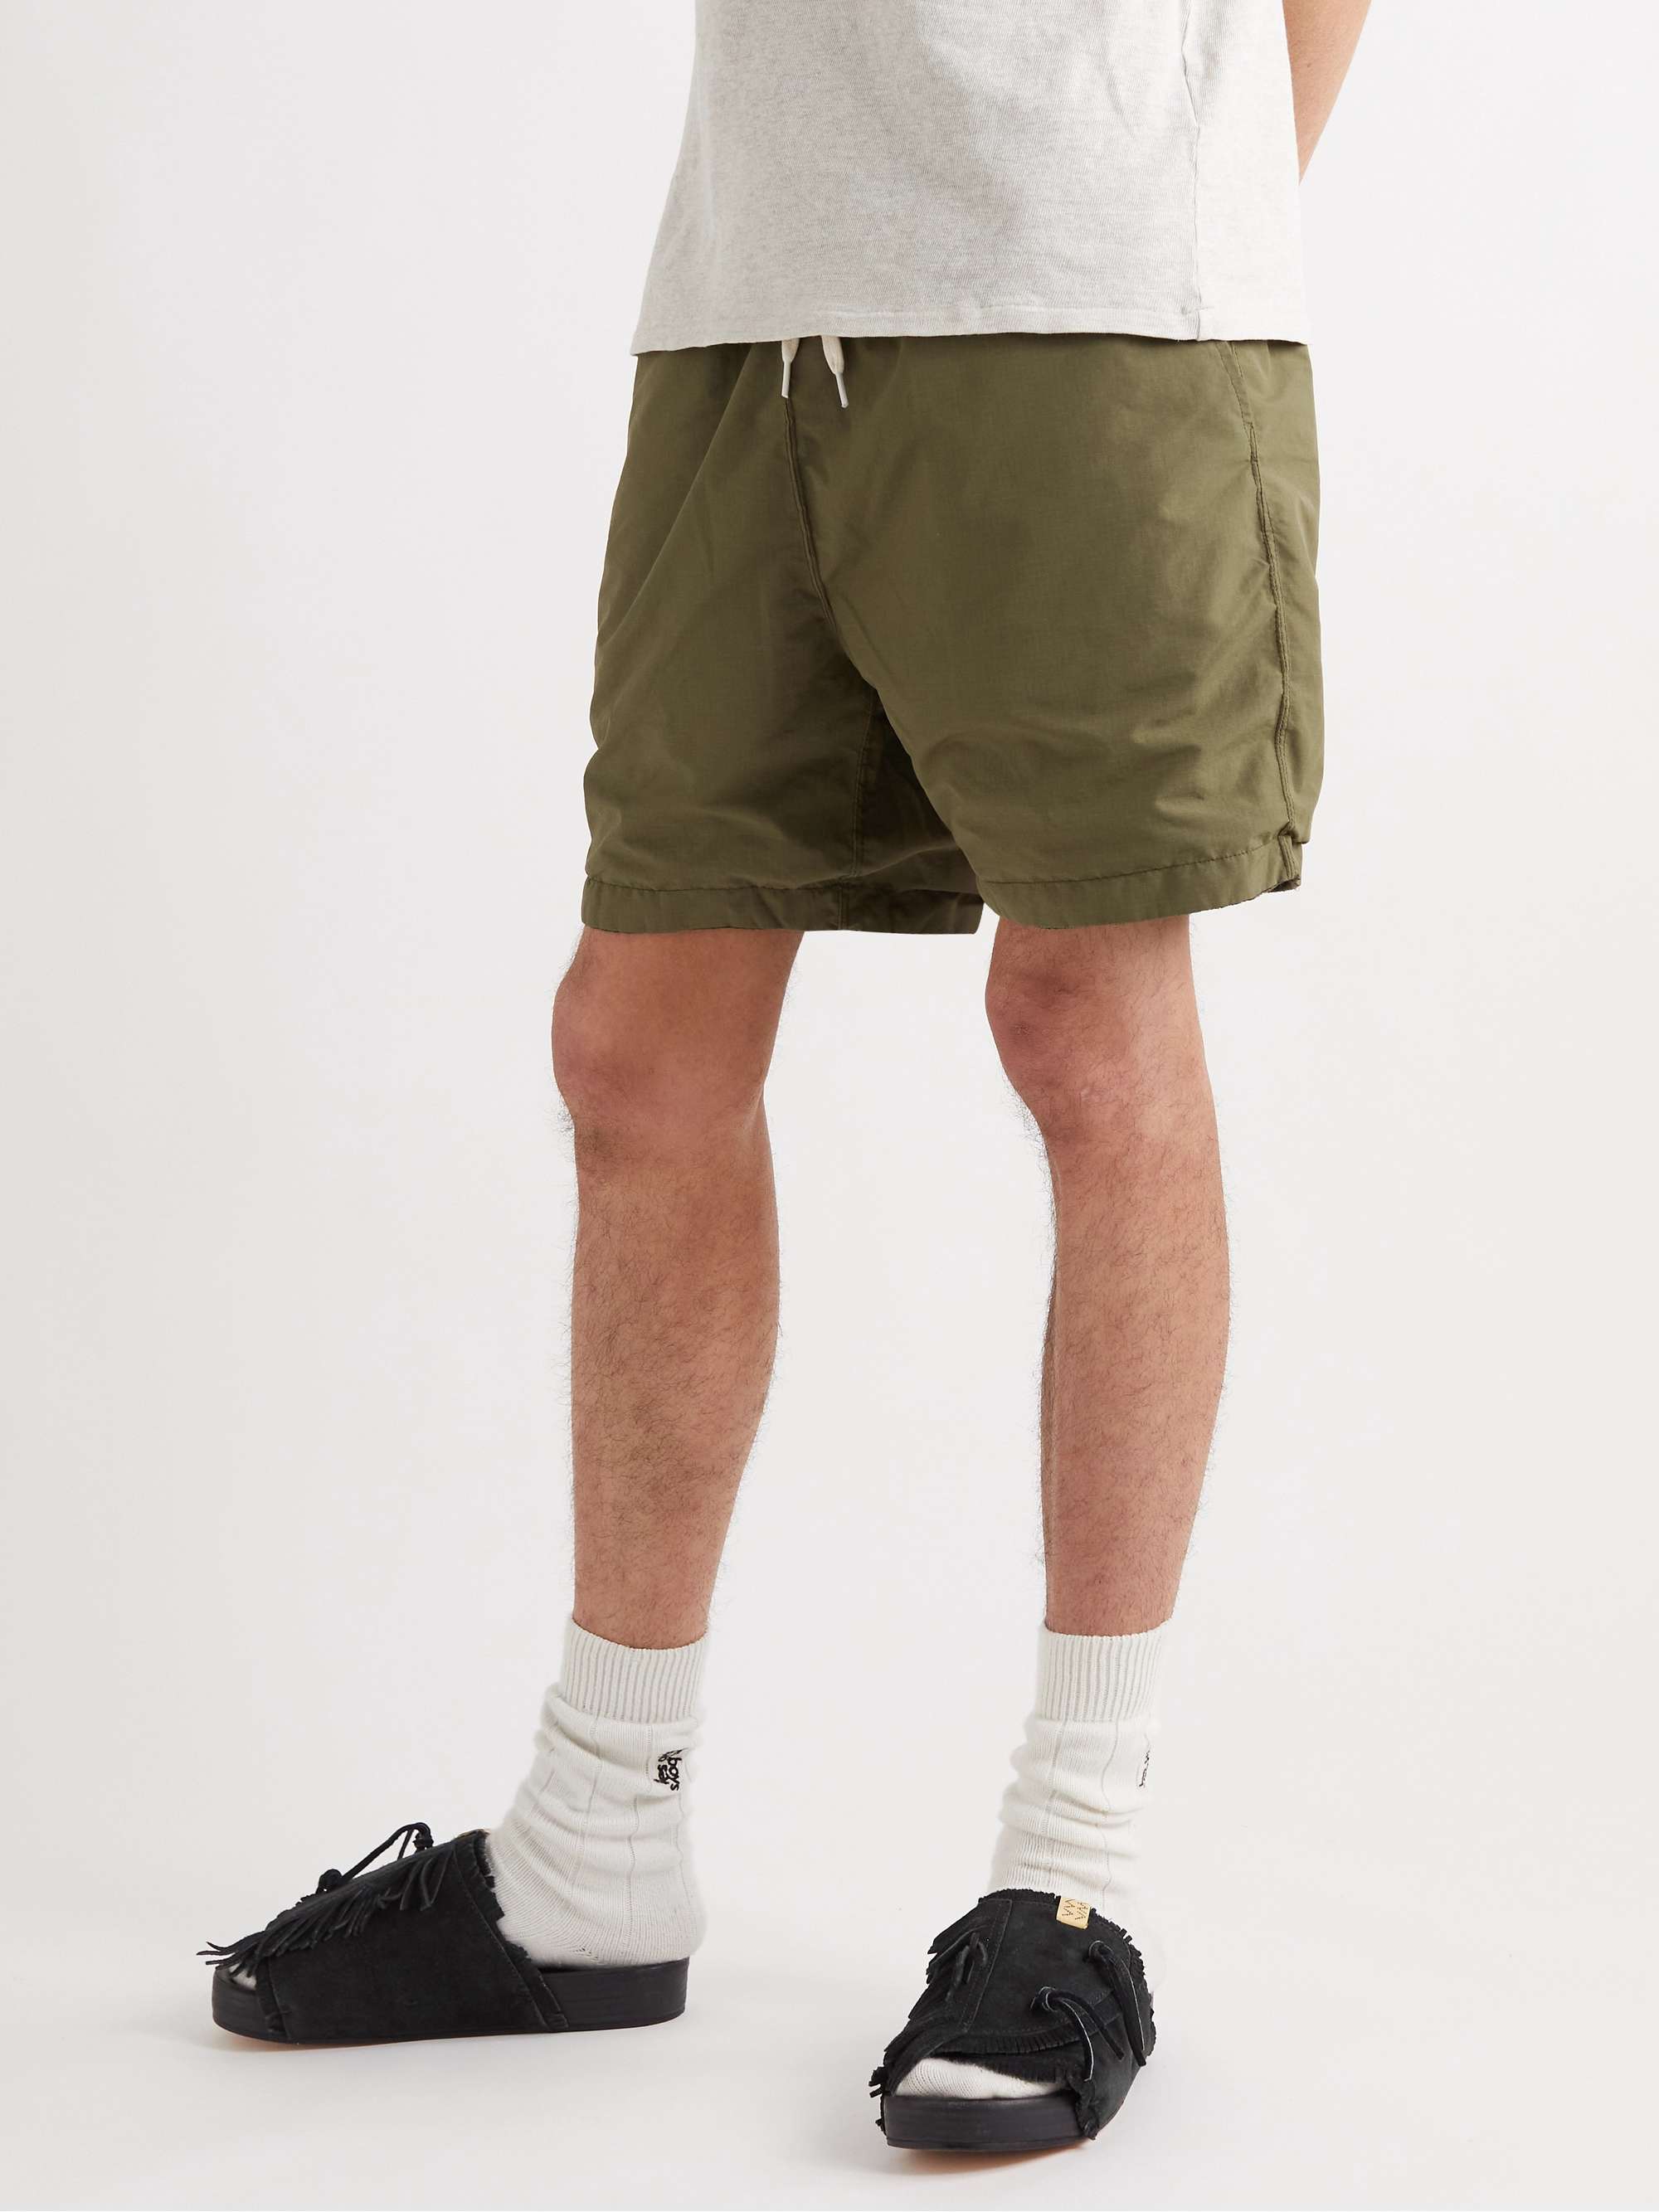 REMI RELIEF Reversible Linen and Velour Drawstring Shorts for Men | MR ...